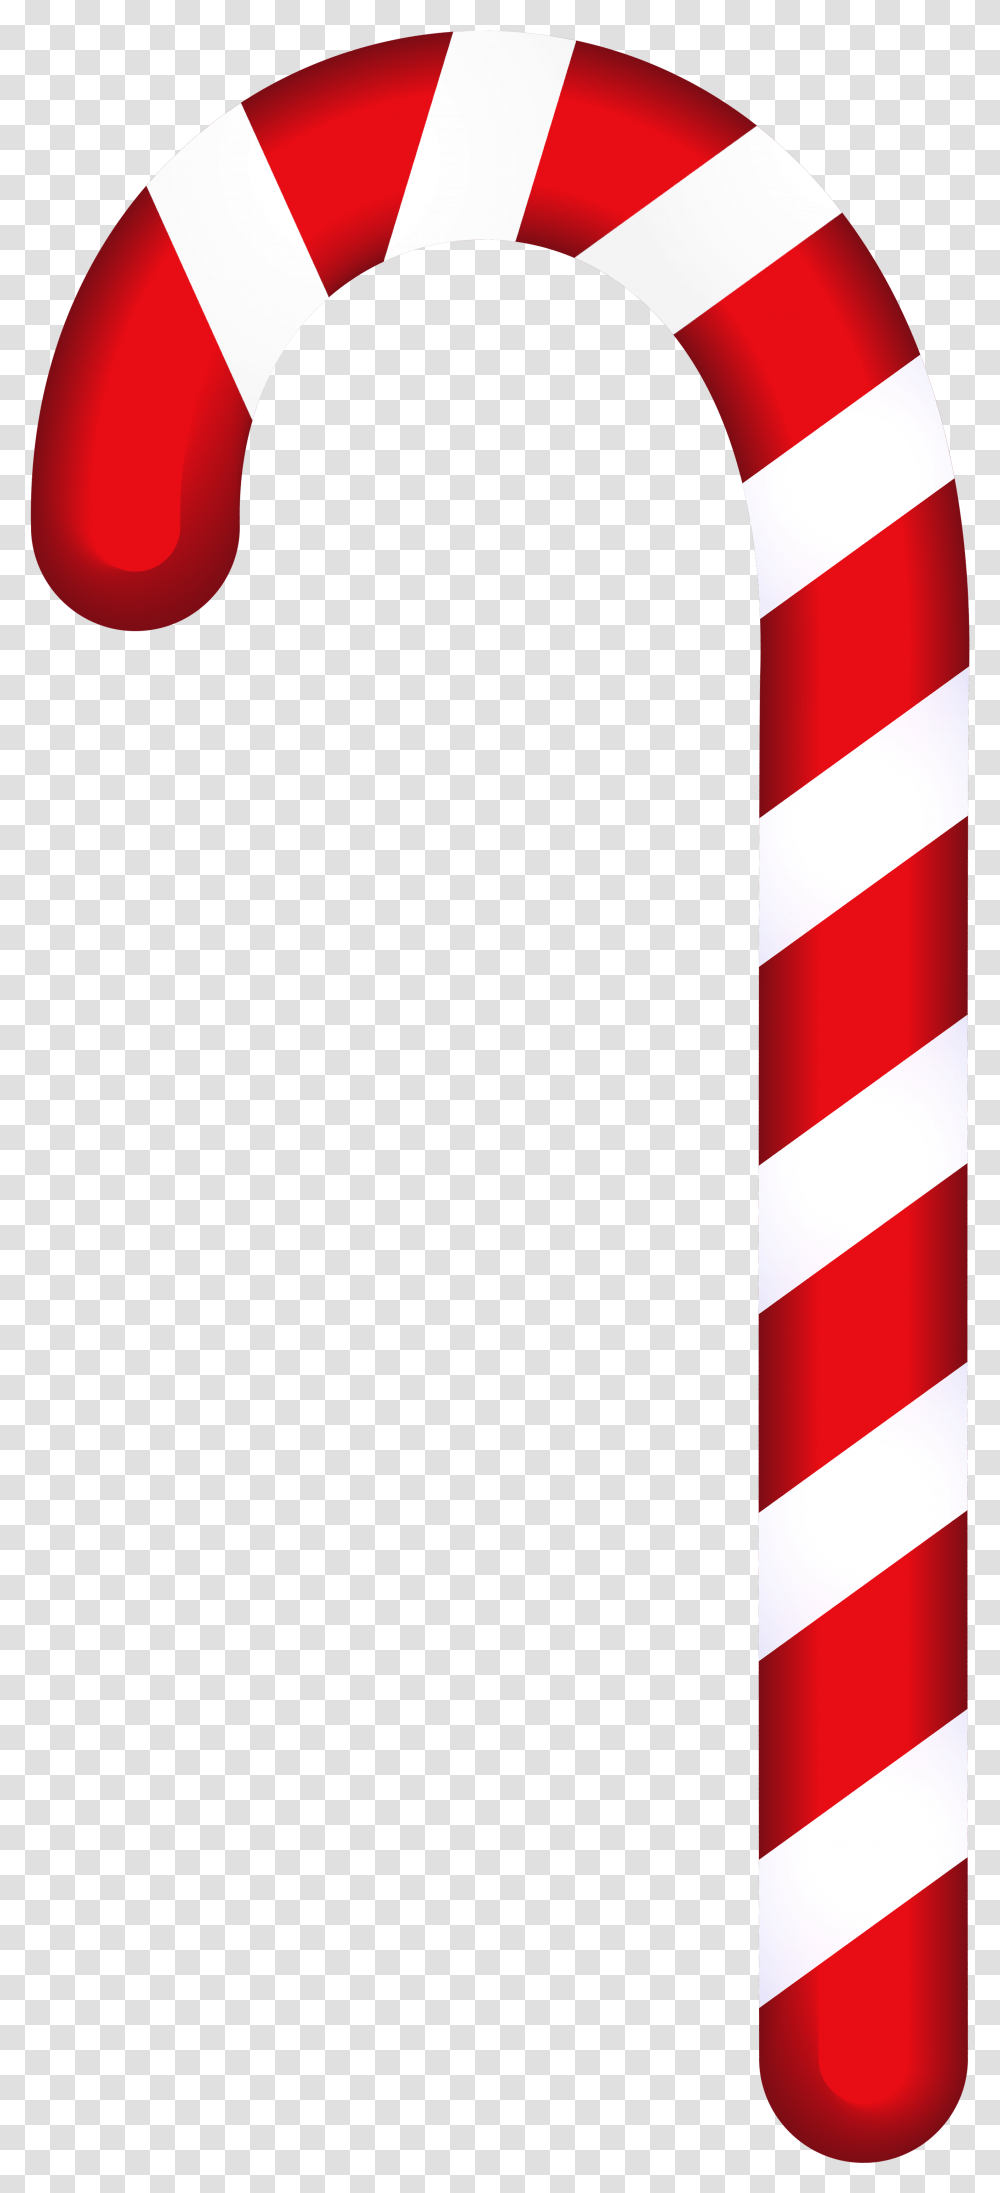 Candy Cane Scraps On Candy Canes Vintage Christmas Candy Cane Clipart, Sweets, Food, Confectionery Transparent Png